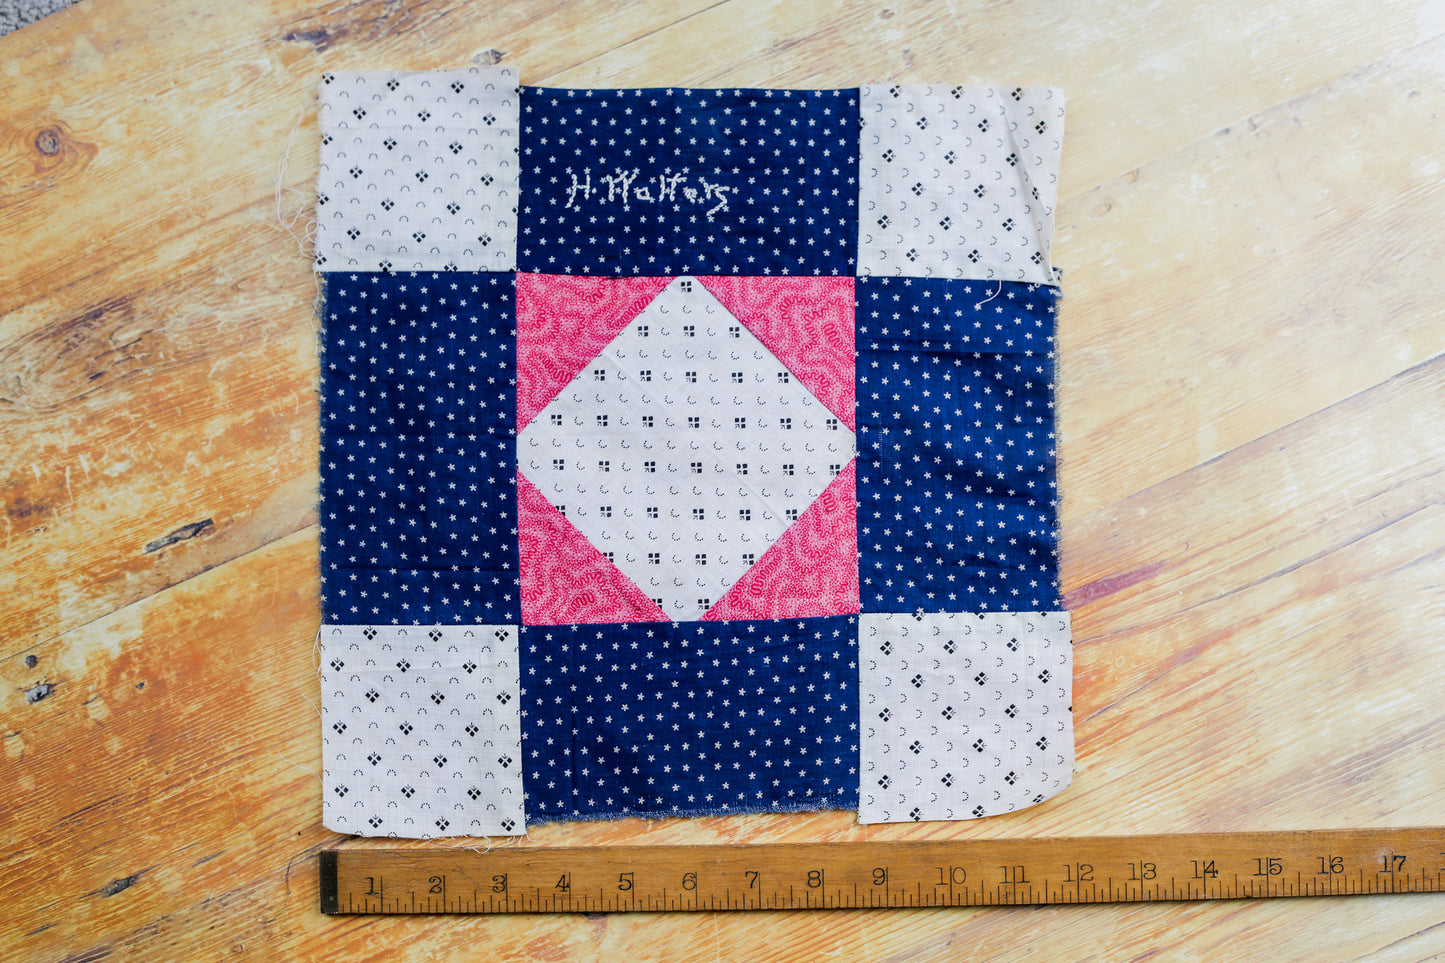 Antique Blue and Pink “H. Walters” Signed Quilt Block, c1910